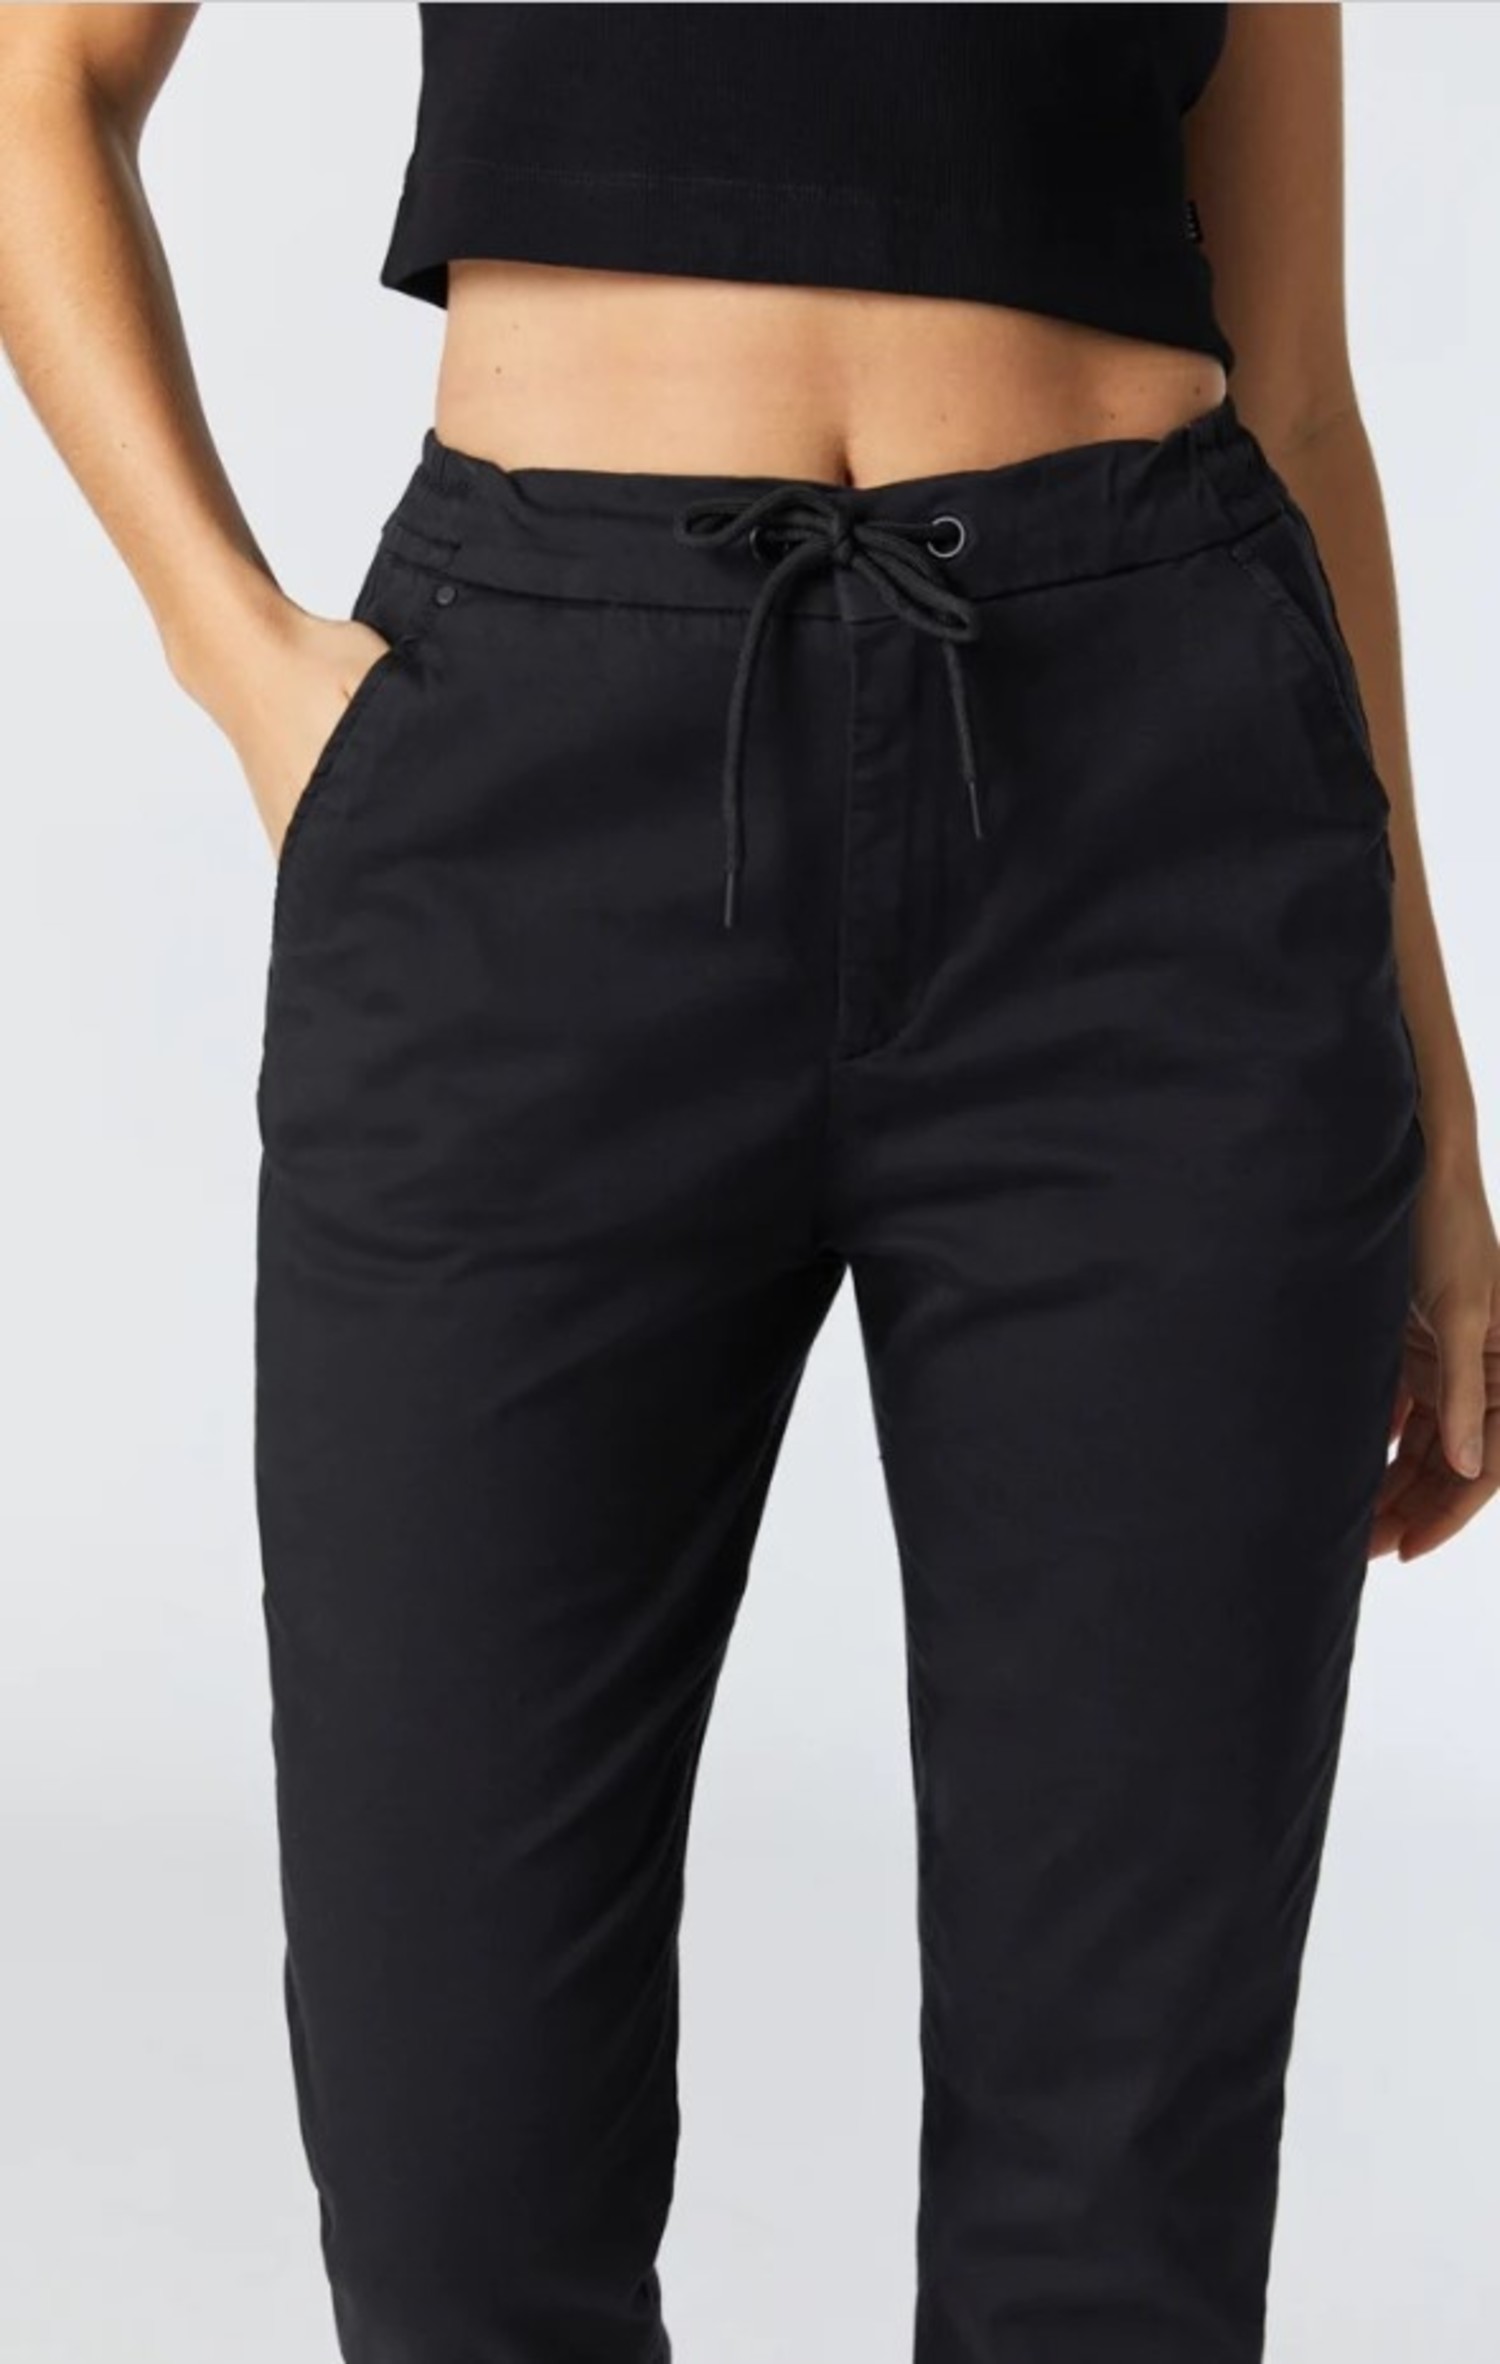 Black Joggers for Women